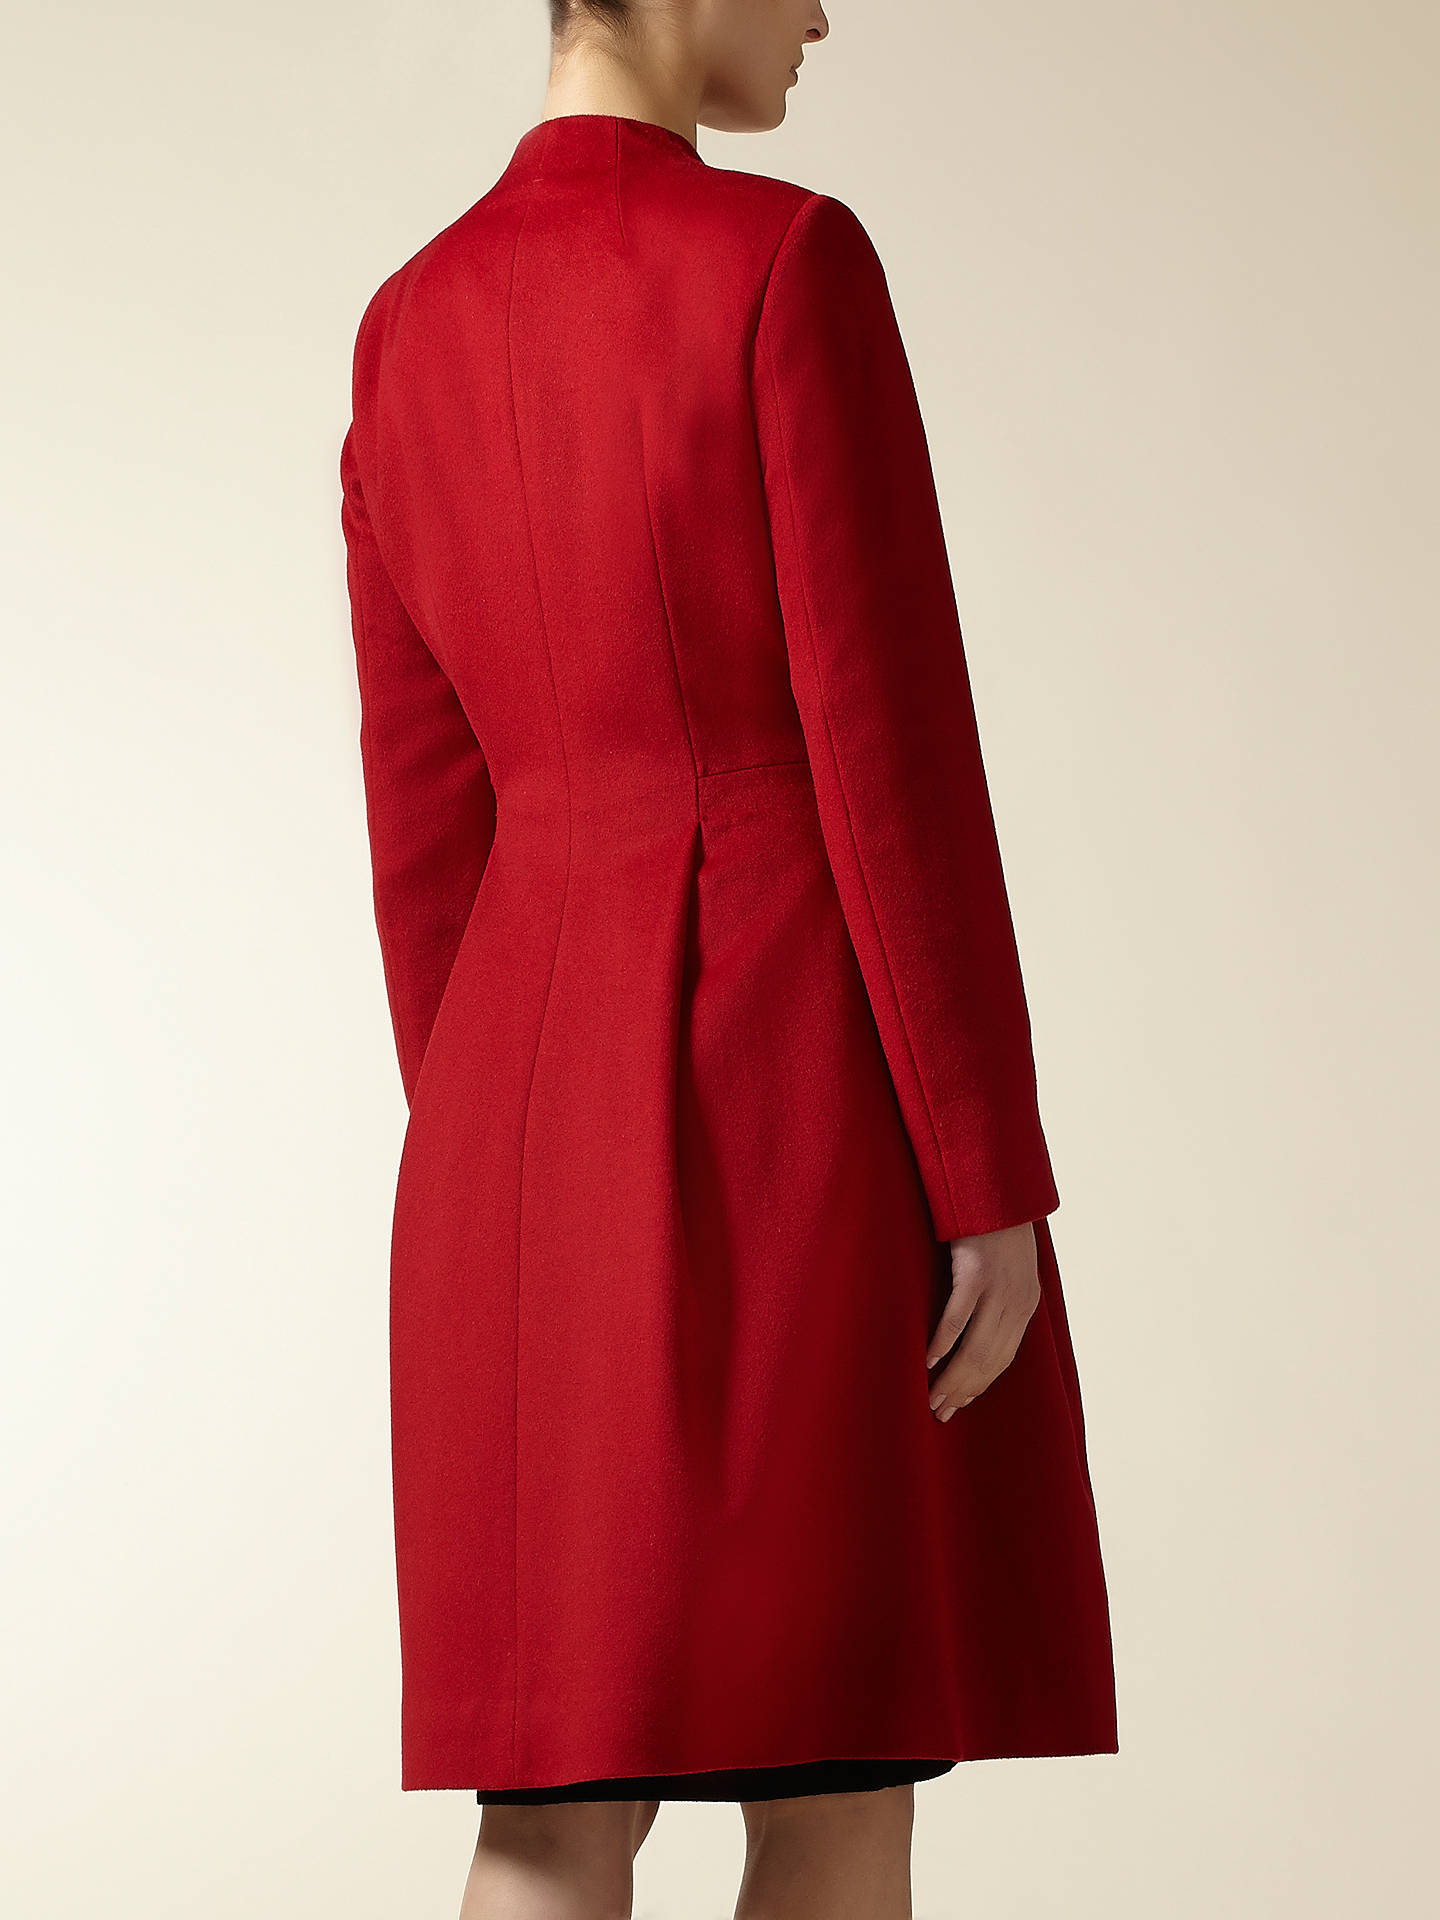 Jaeger Wool And Cashmere Waist Coat, Red at John Lewis & Partners